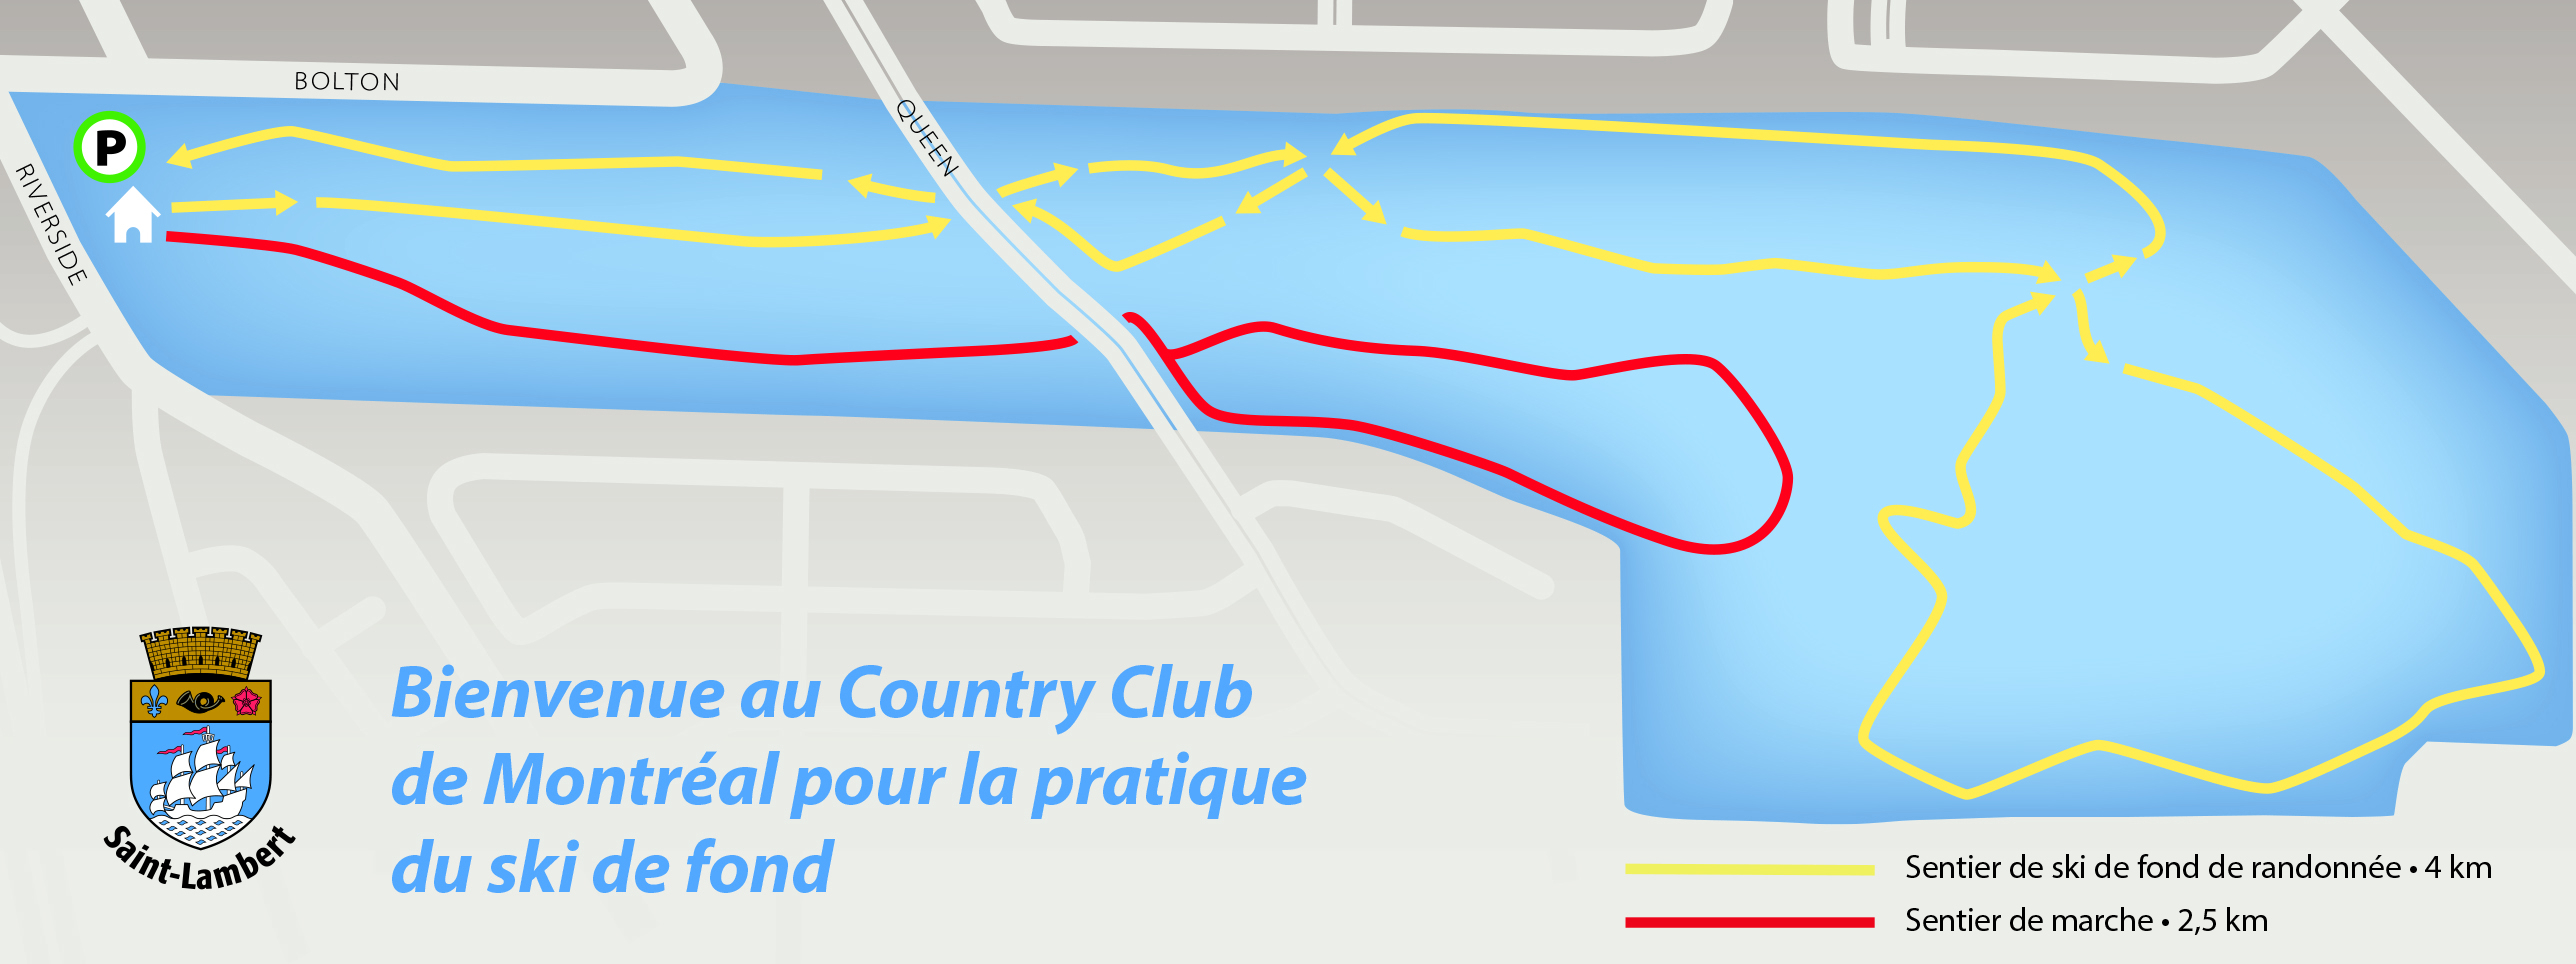 Cross-country ski trails at the Country club of Montreal